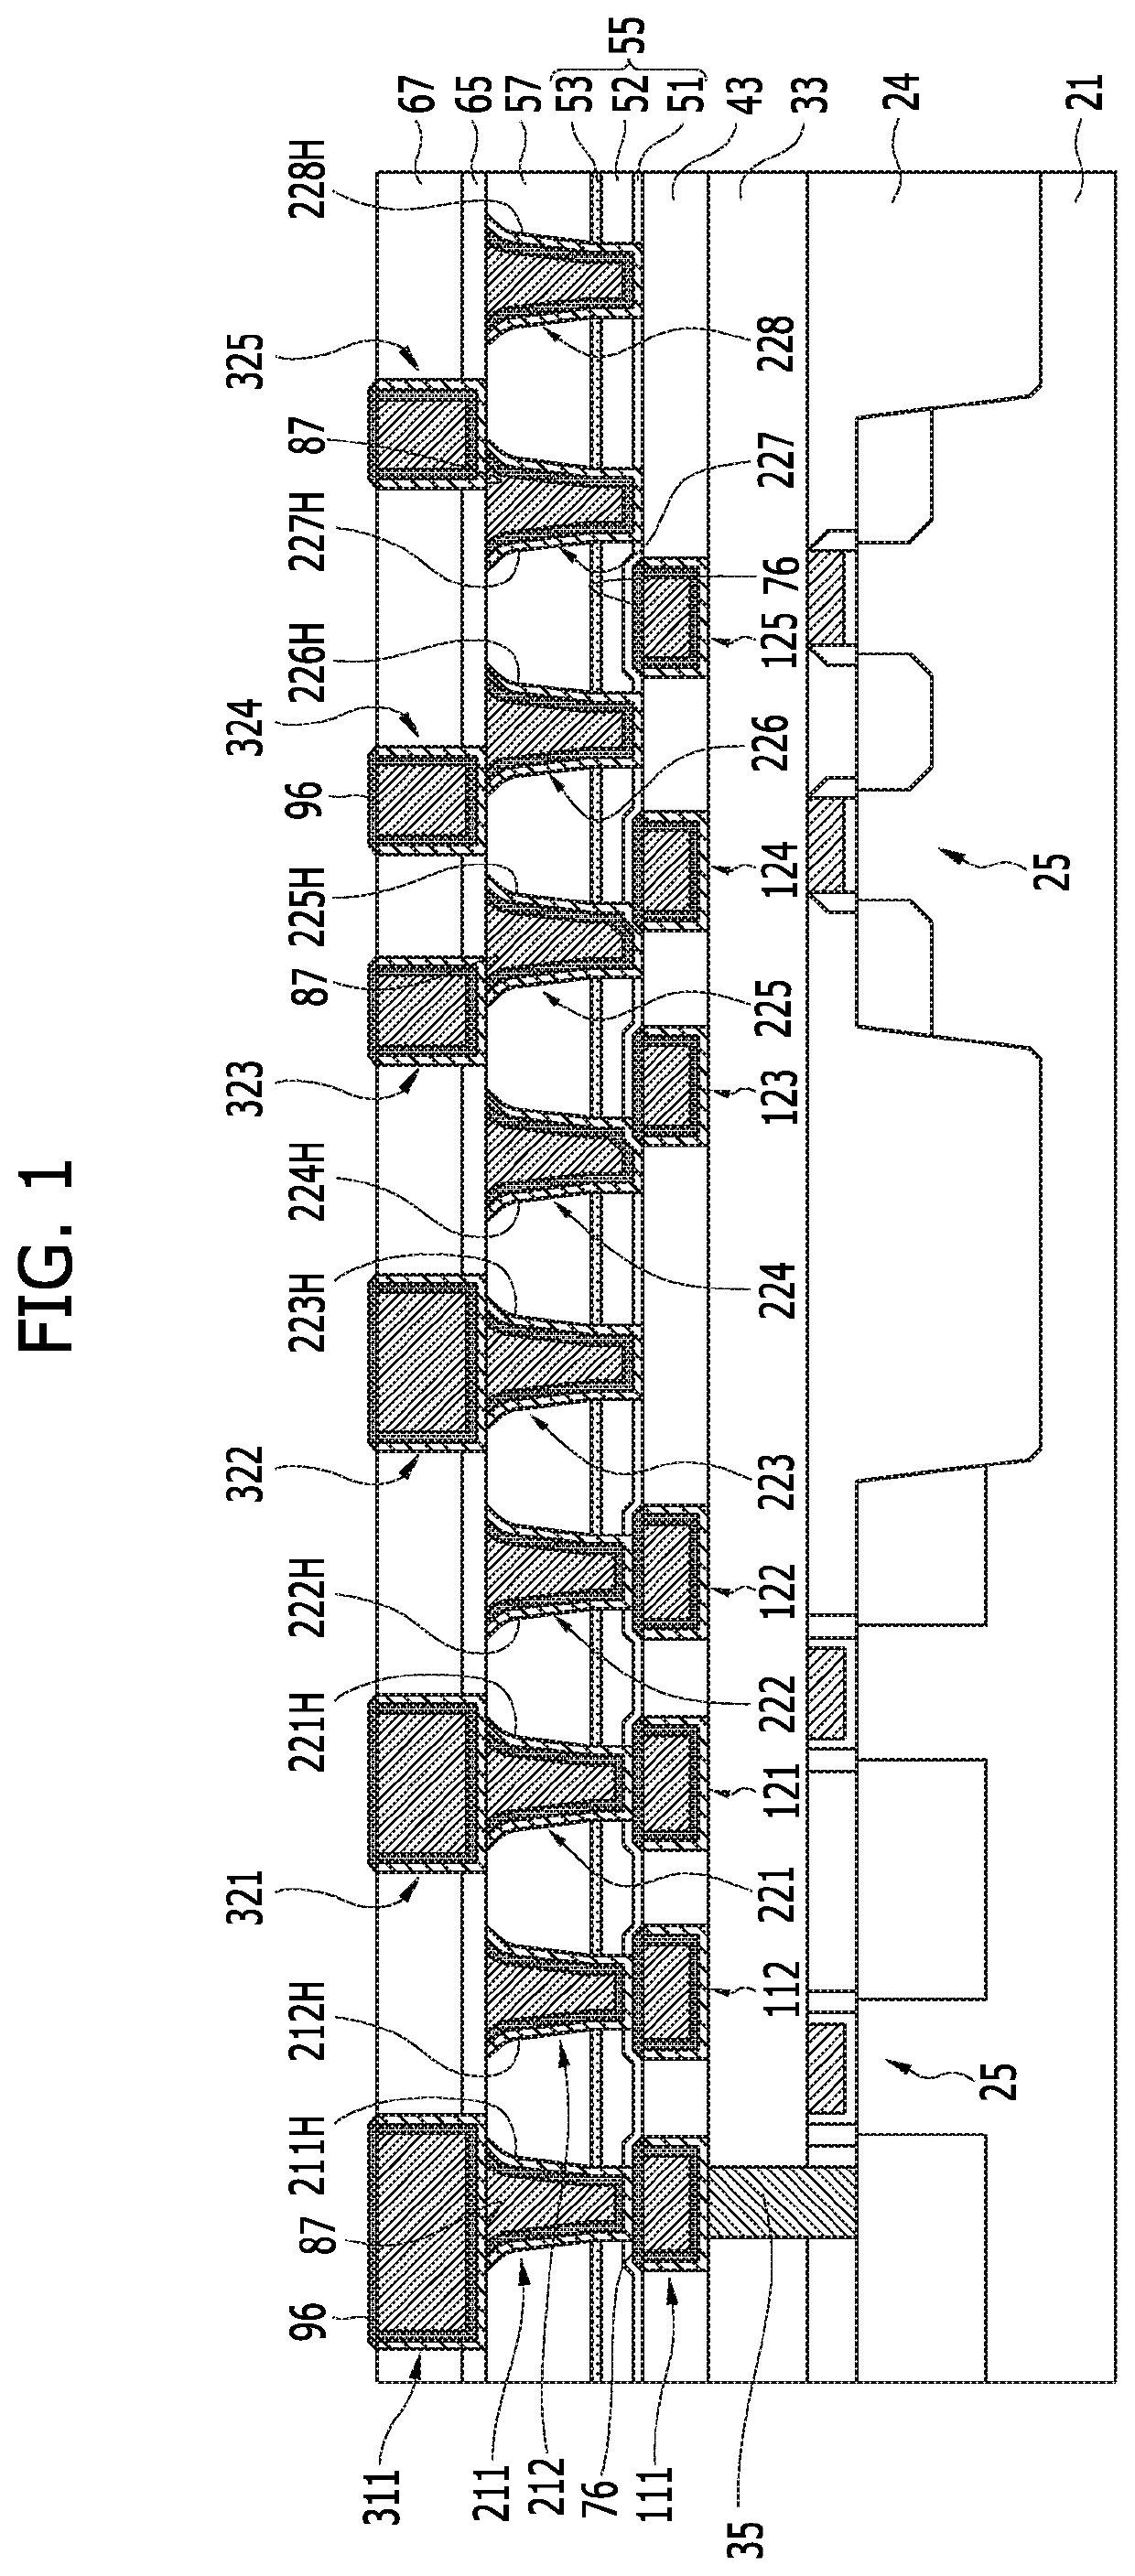 Semiconductor device including dummy contact